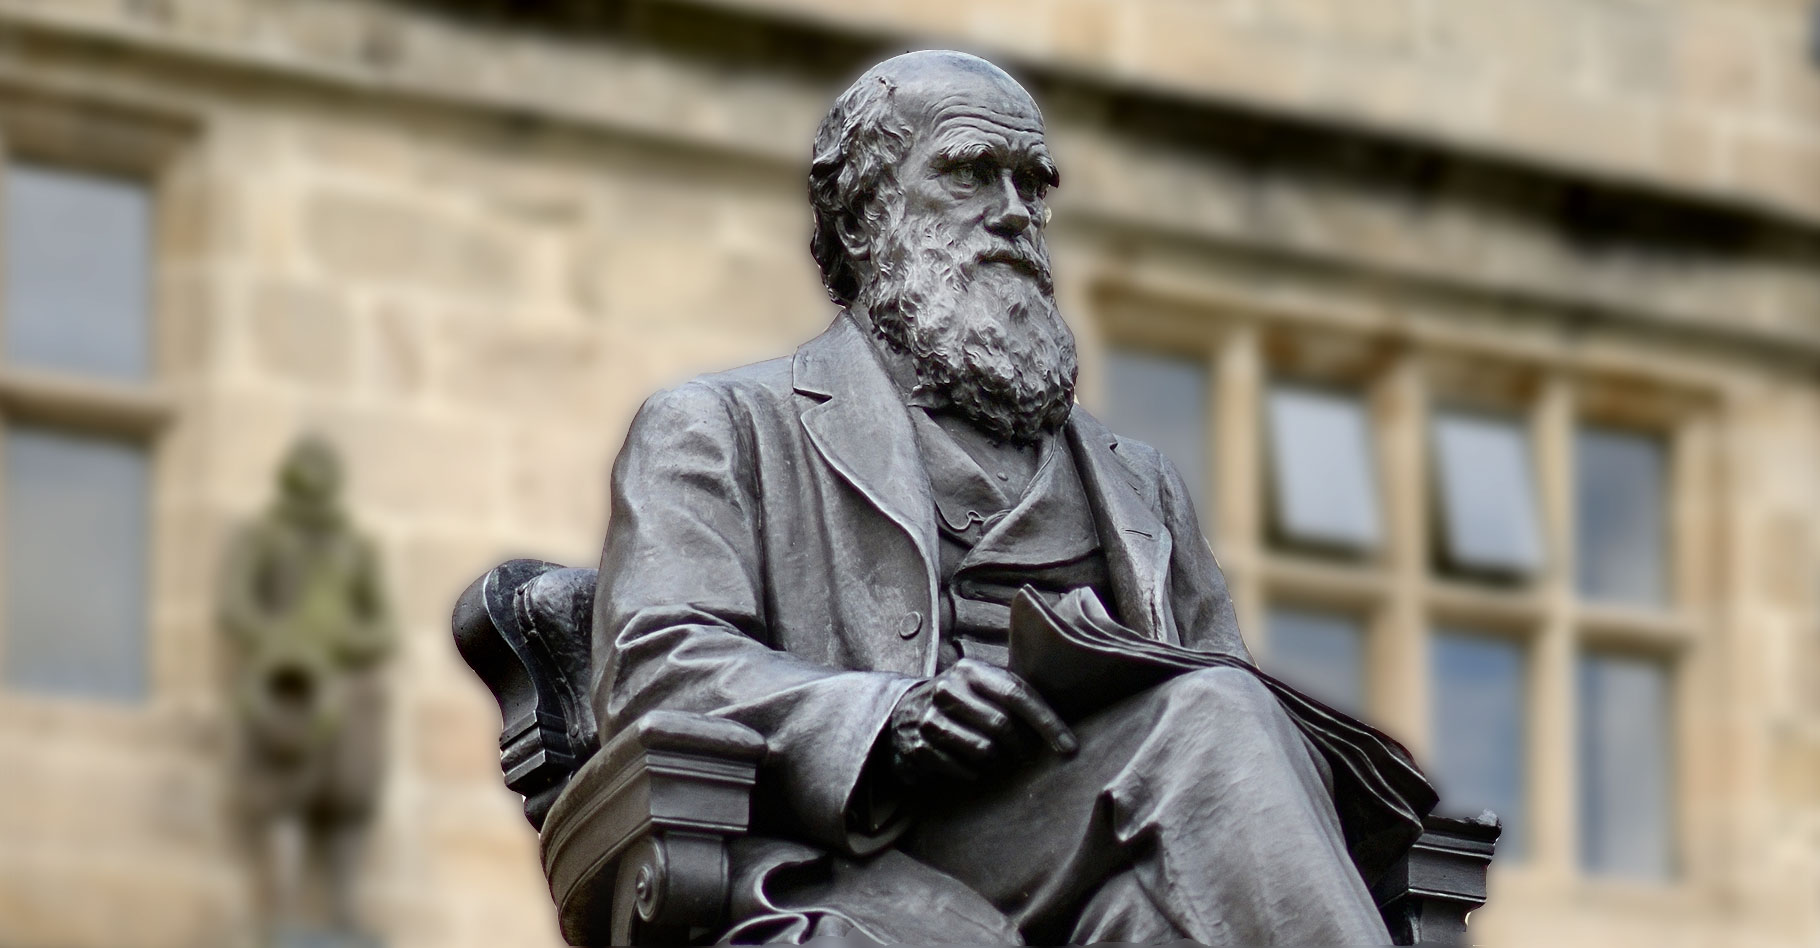 Statue de Charles Darwin. © Velodenz - CC BY-NC 2.0